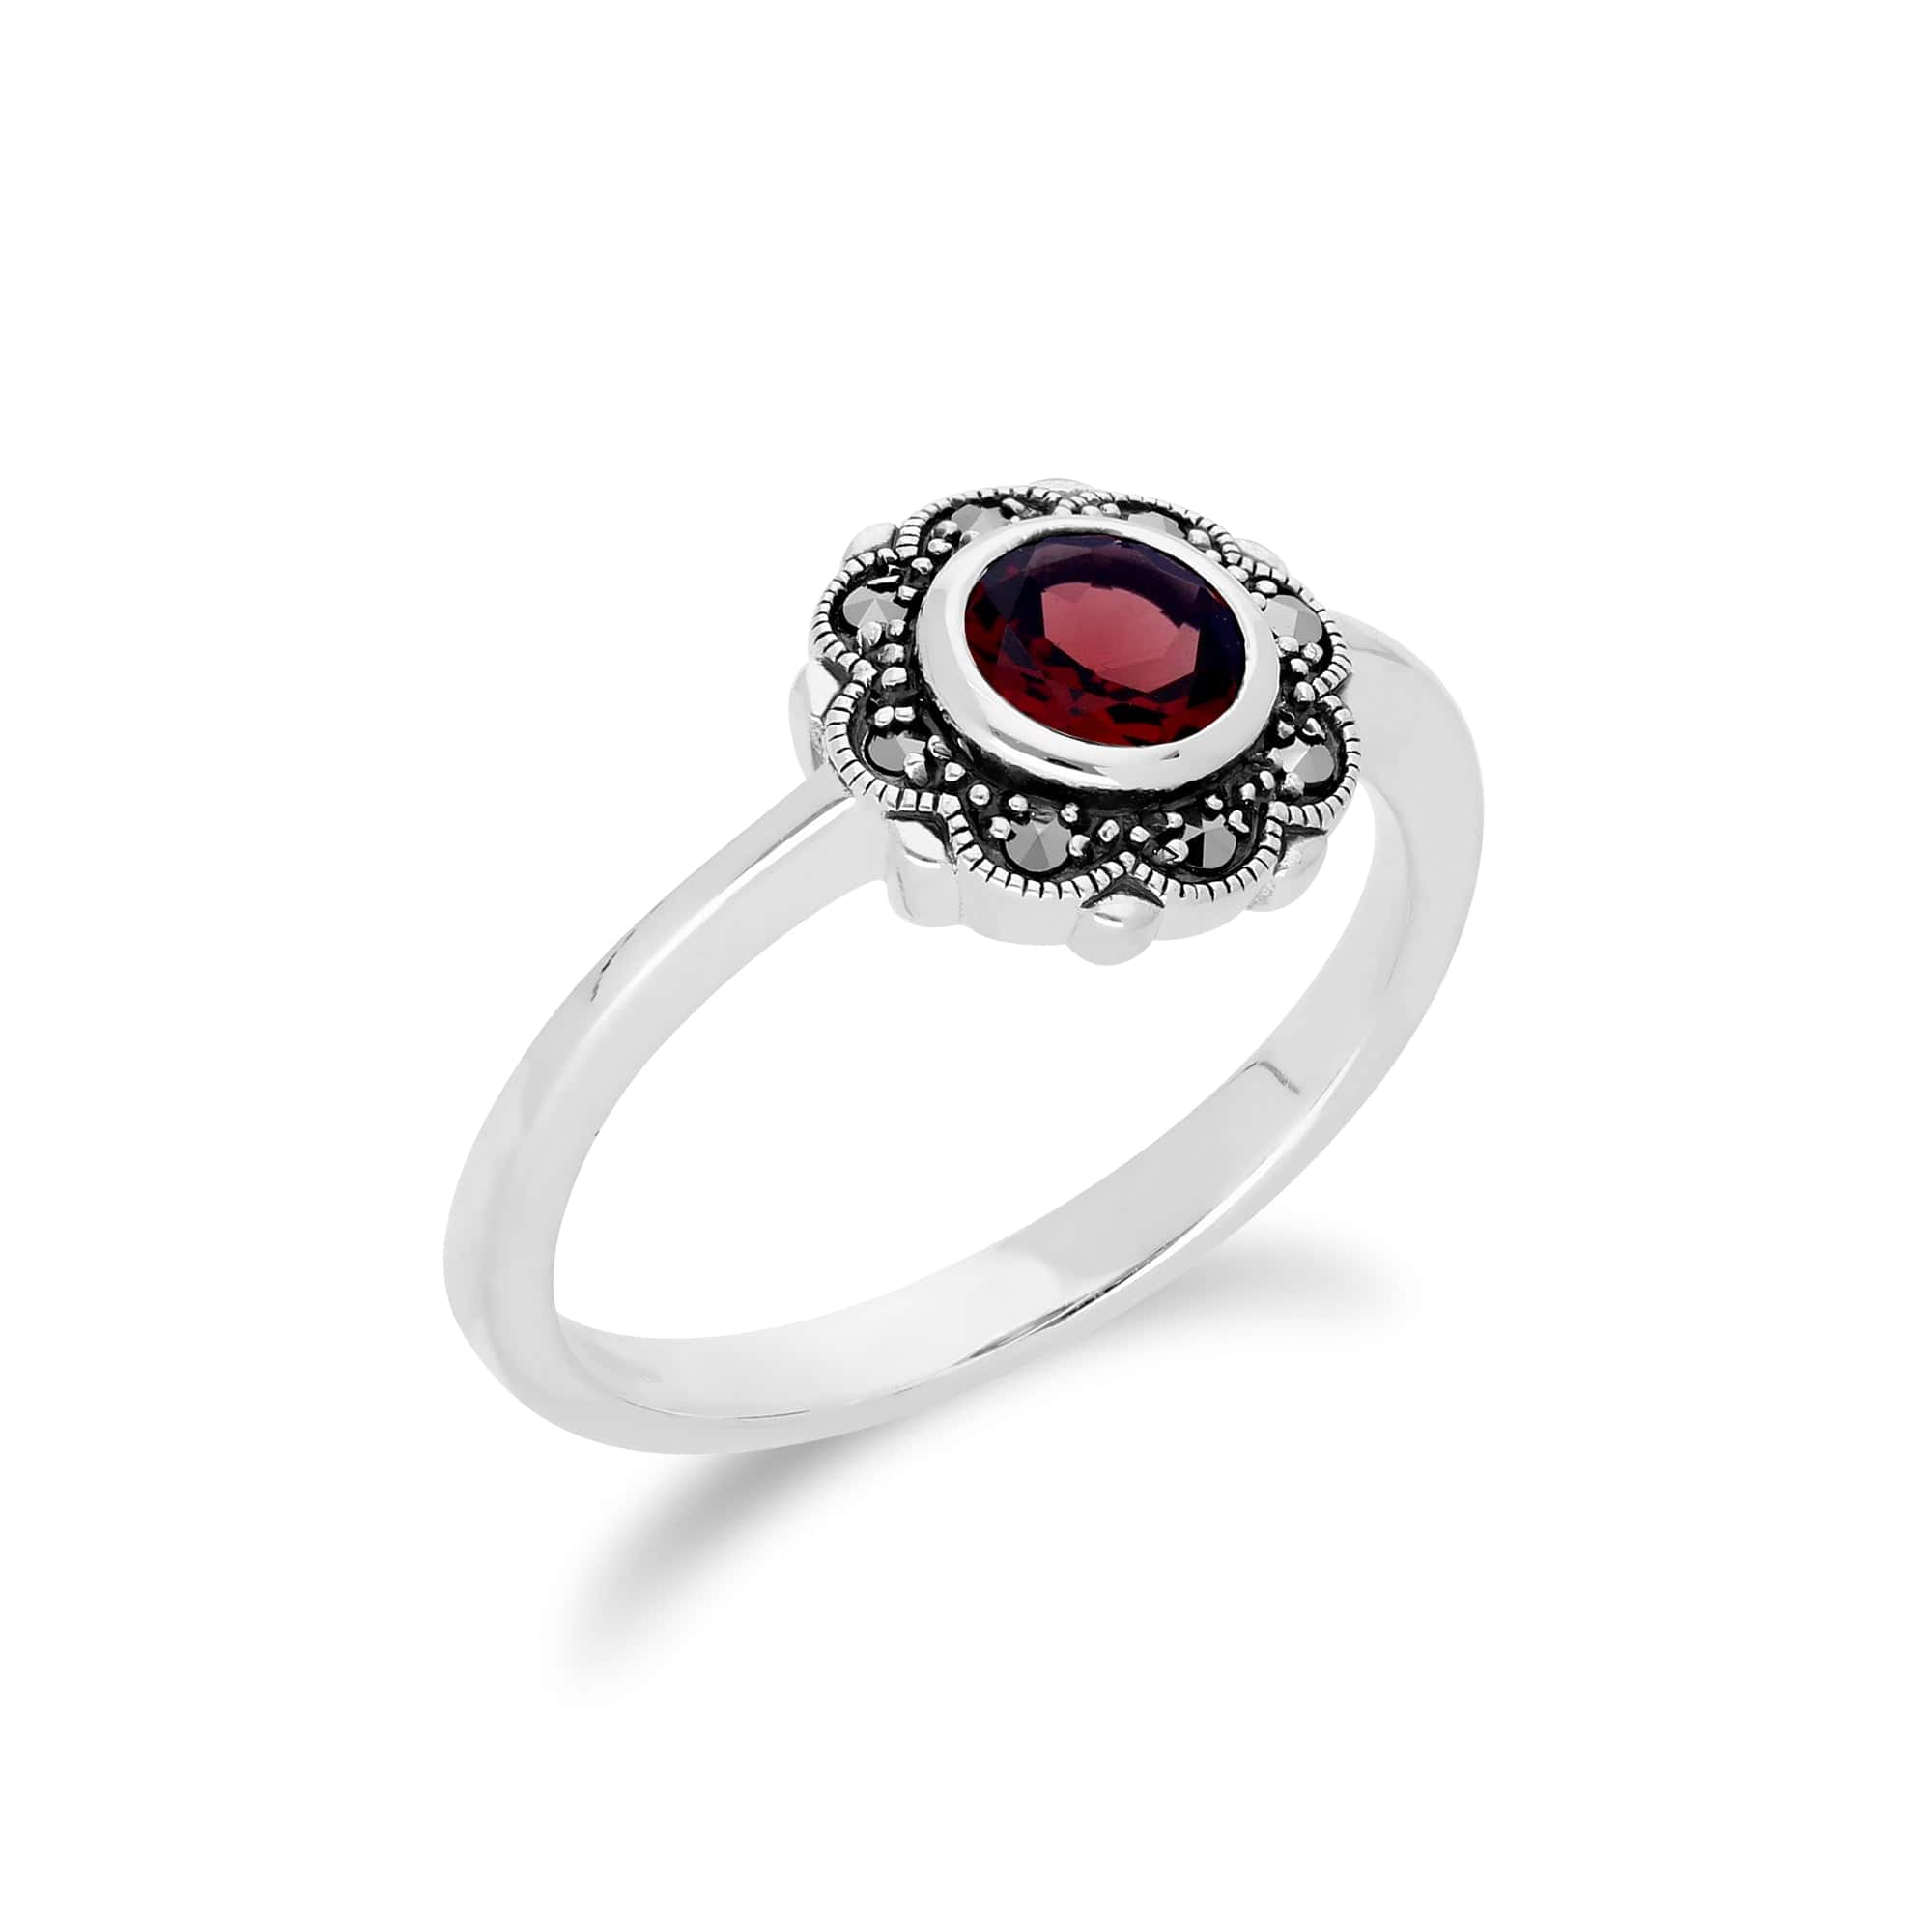 214R597001925 Floral Round Garnet & Marcasite Halo Ring in 925 Sterling Silver 2